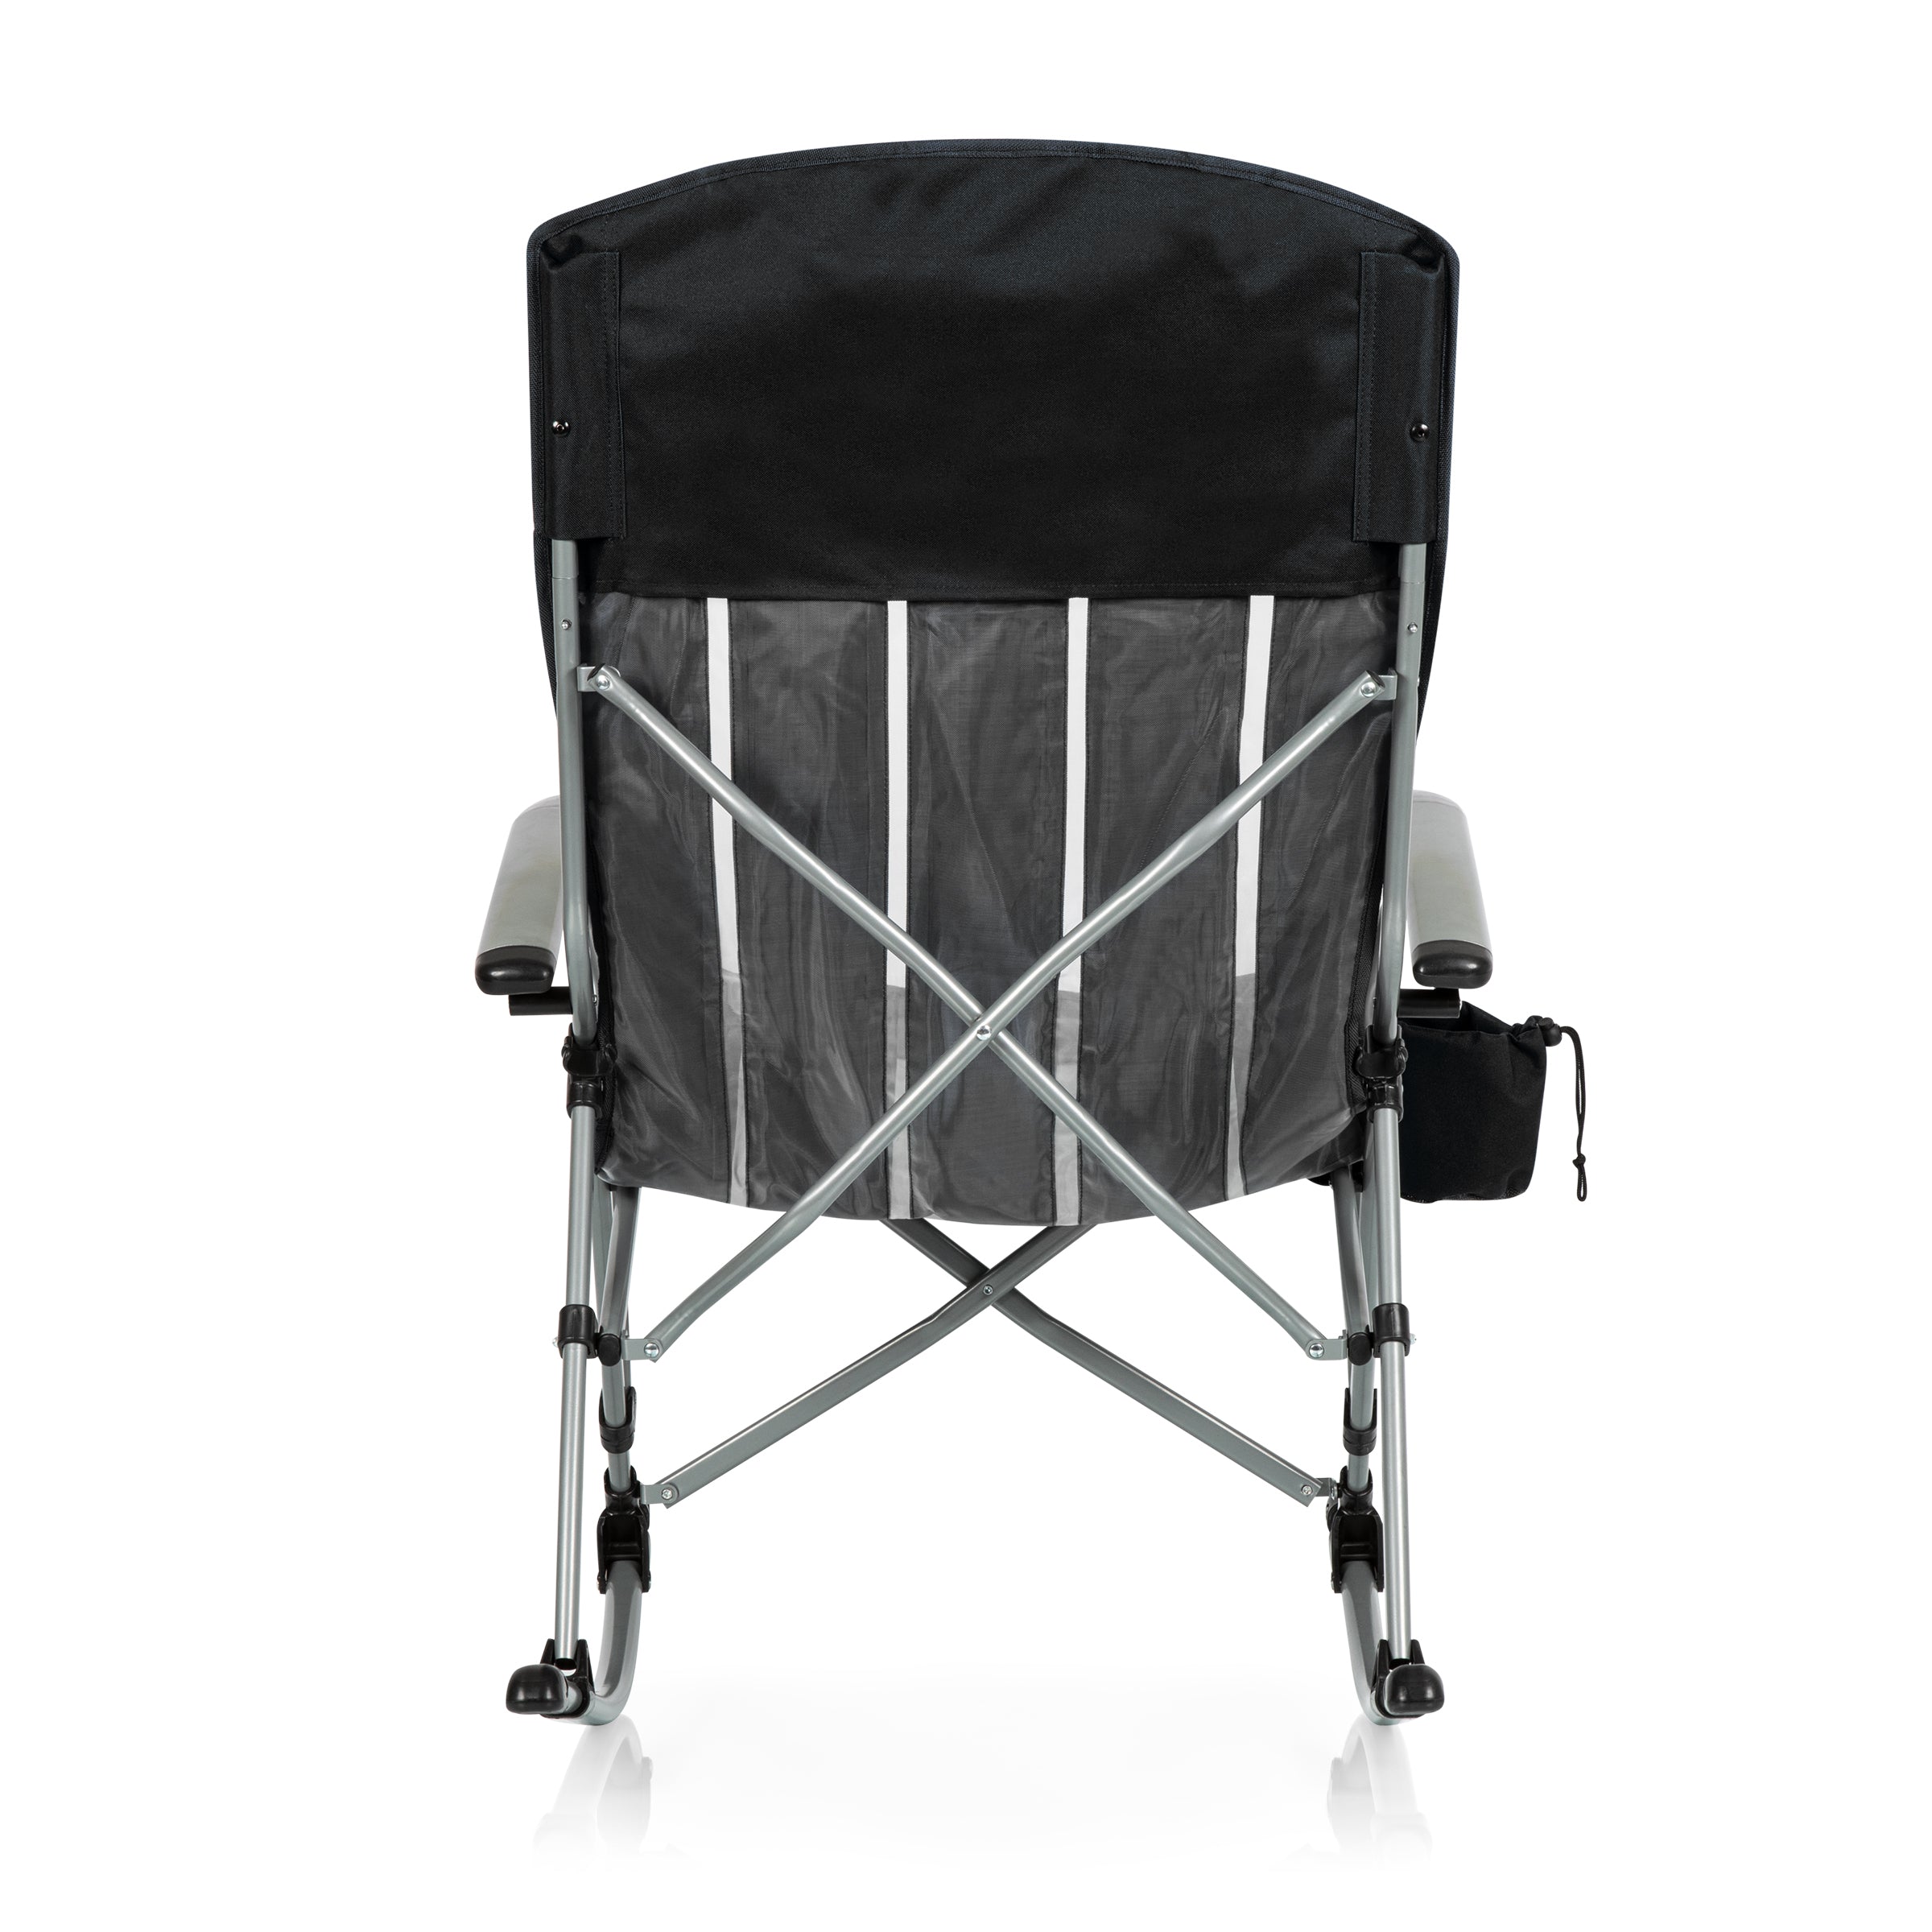 Detroit Lions - Outdoor Rocking Camp Chair